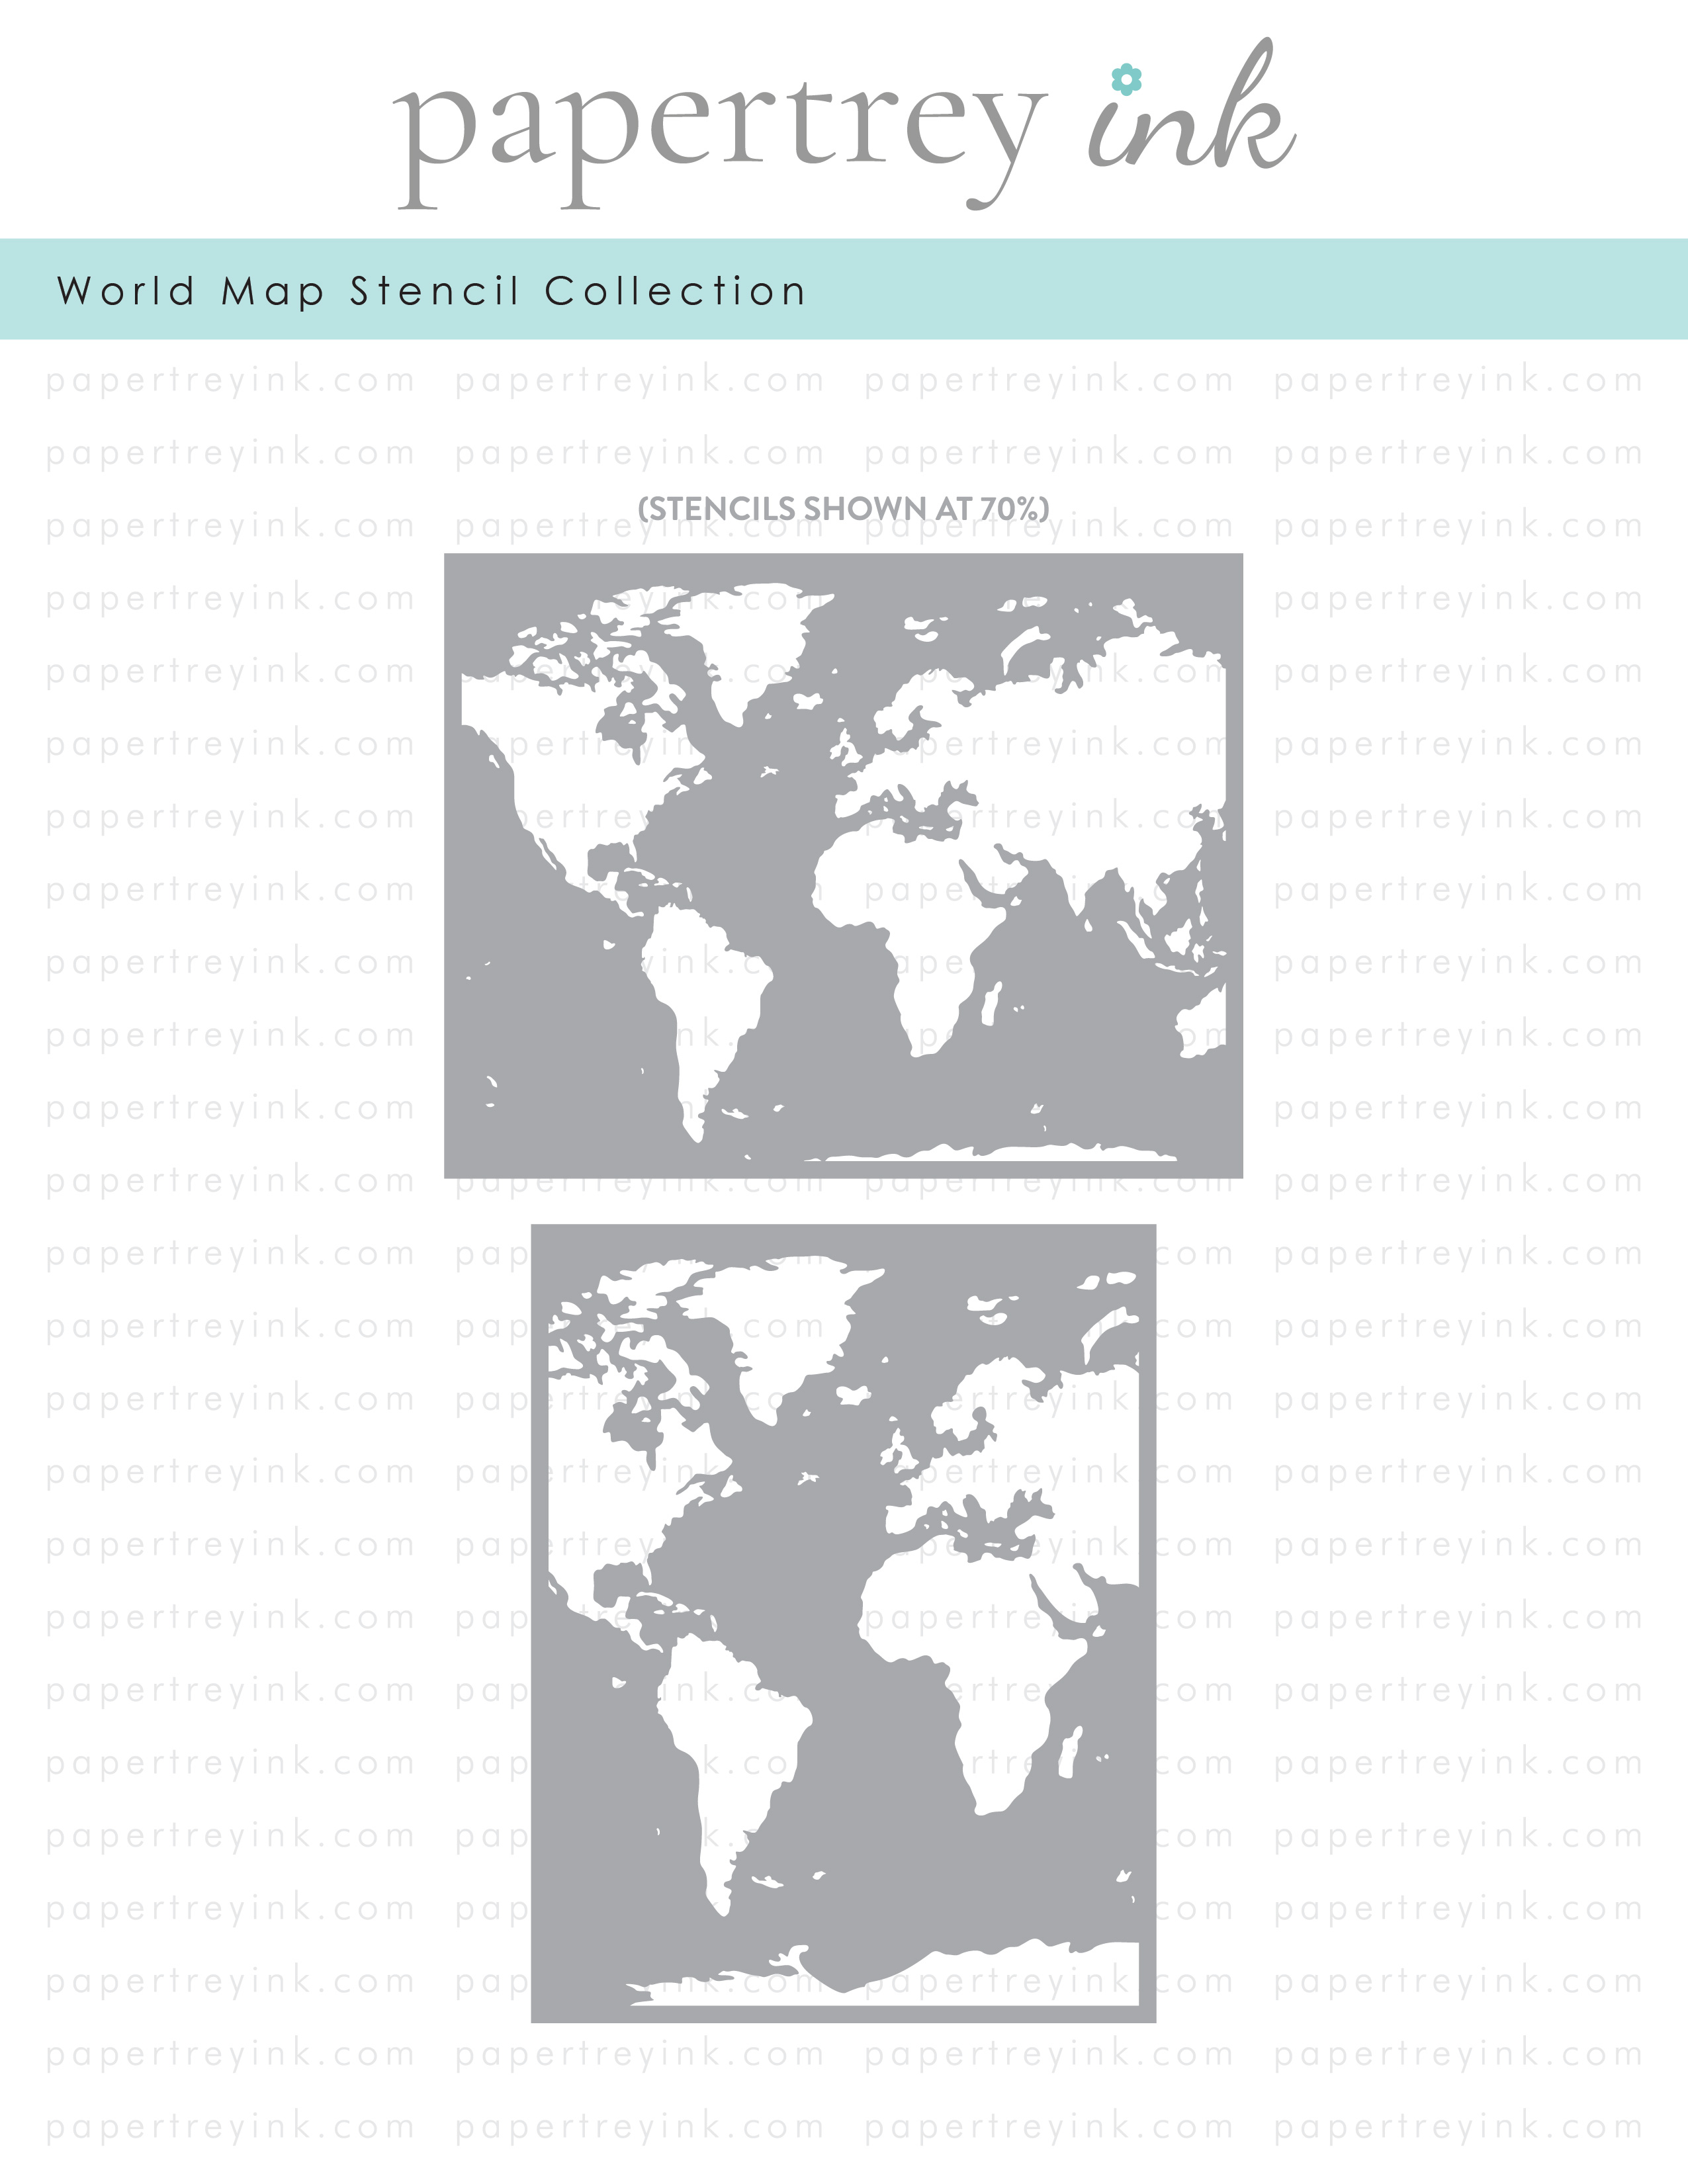 Papertrey Ink - World Map Stencil Collection (set of 2)